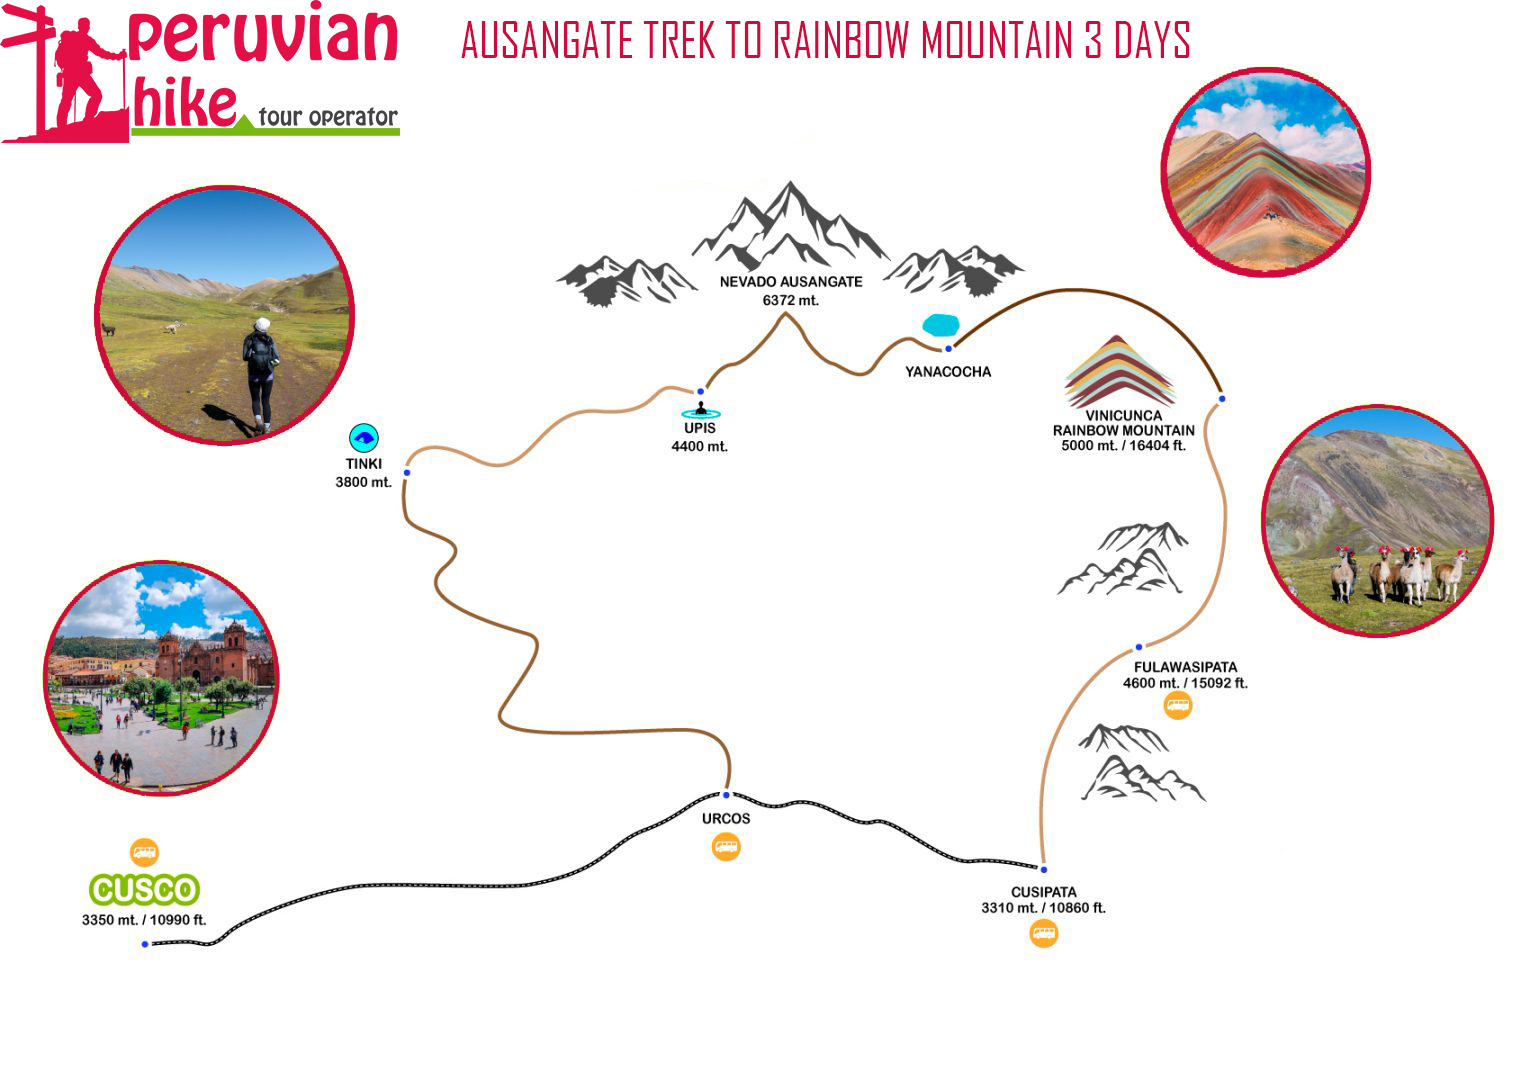 Ausangate trek and Rainbow Mountain 4 days map and itinerary